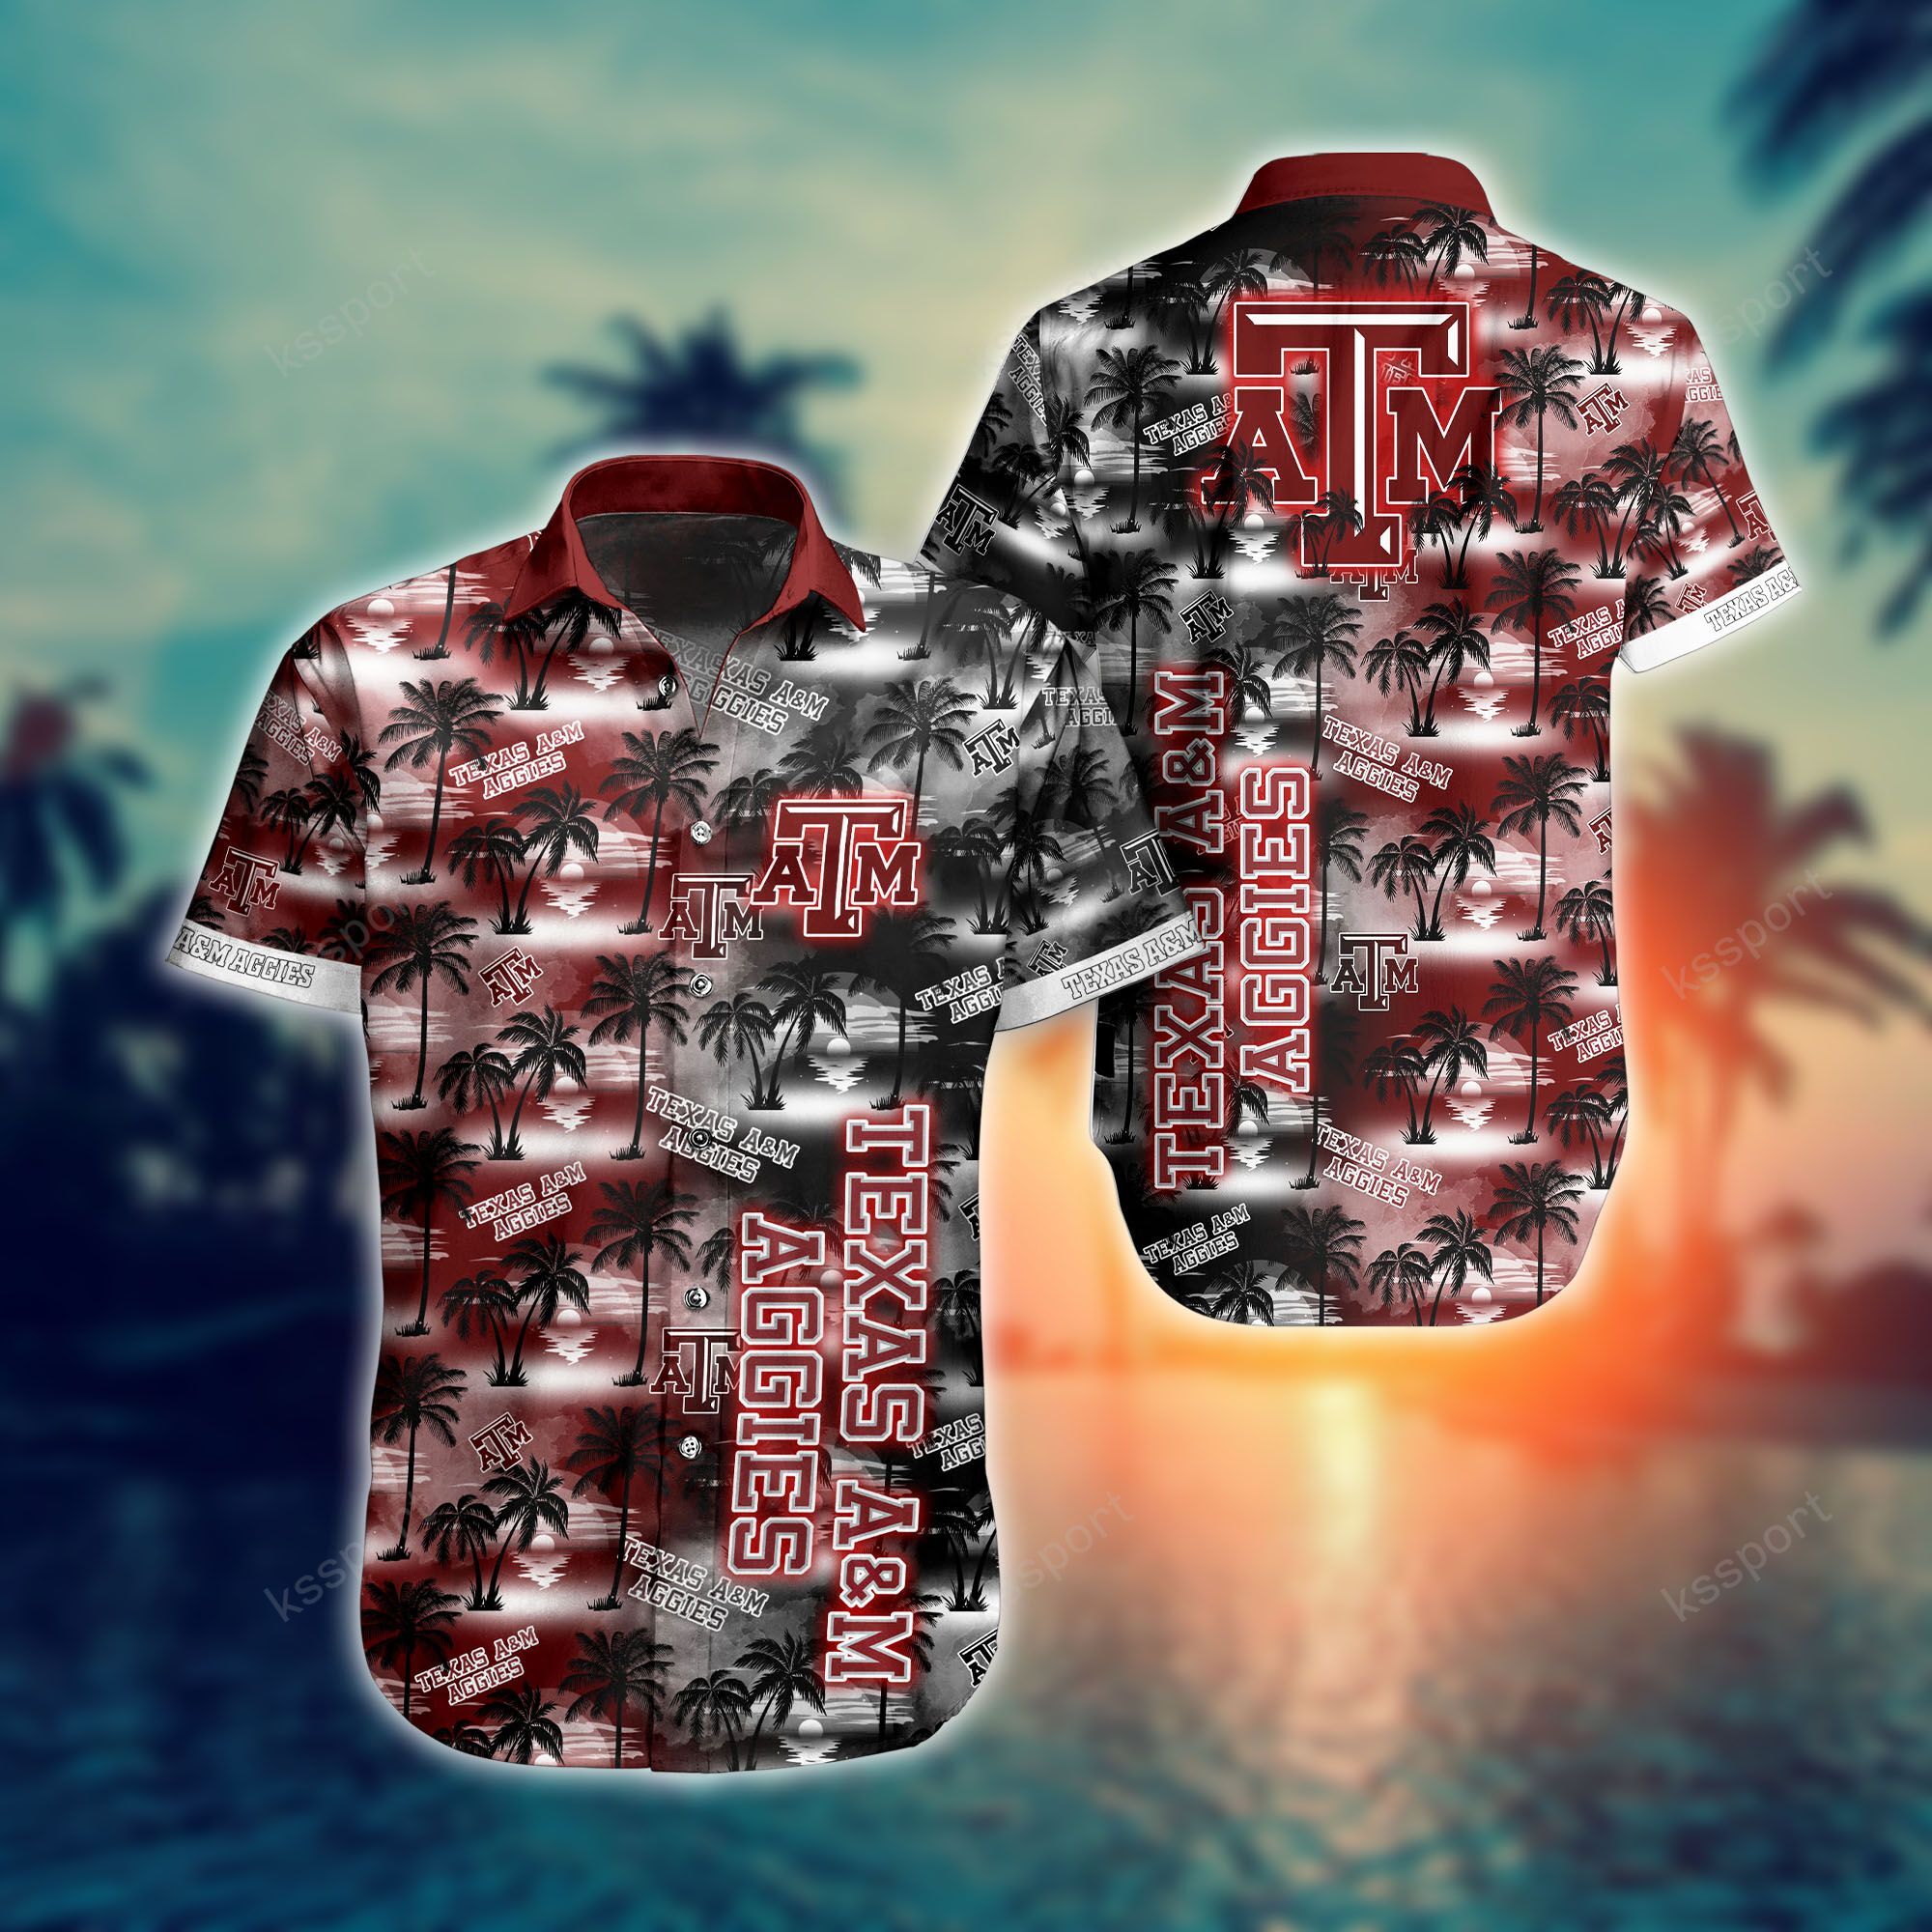 Treat yourself to a cool Hawaiian set today! 63